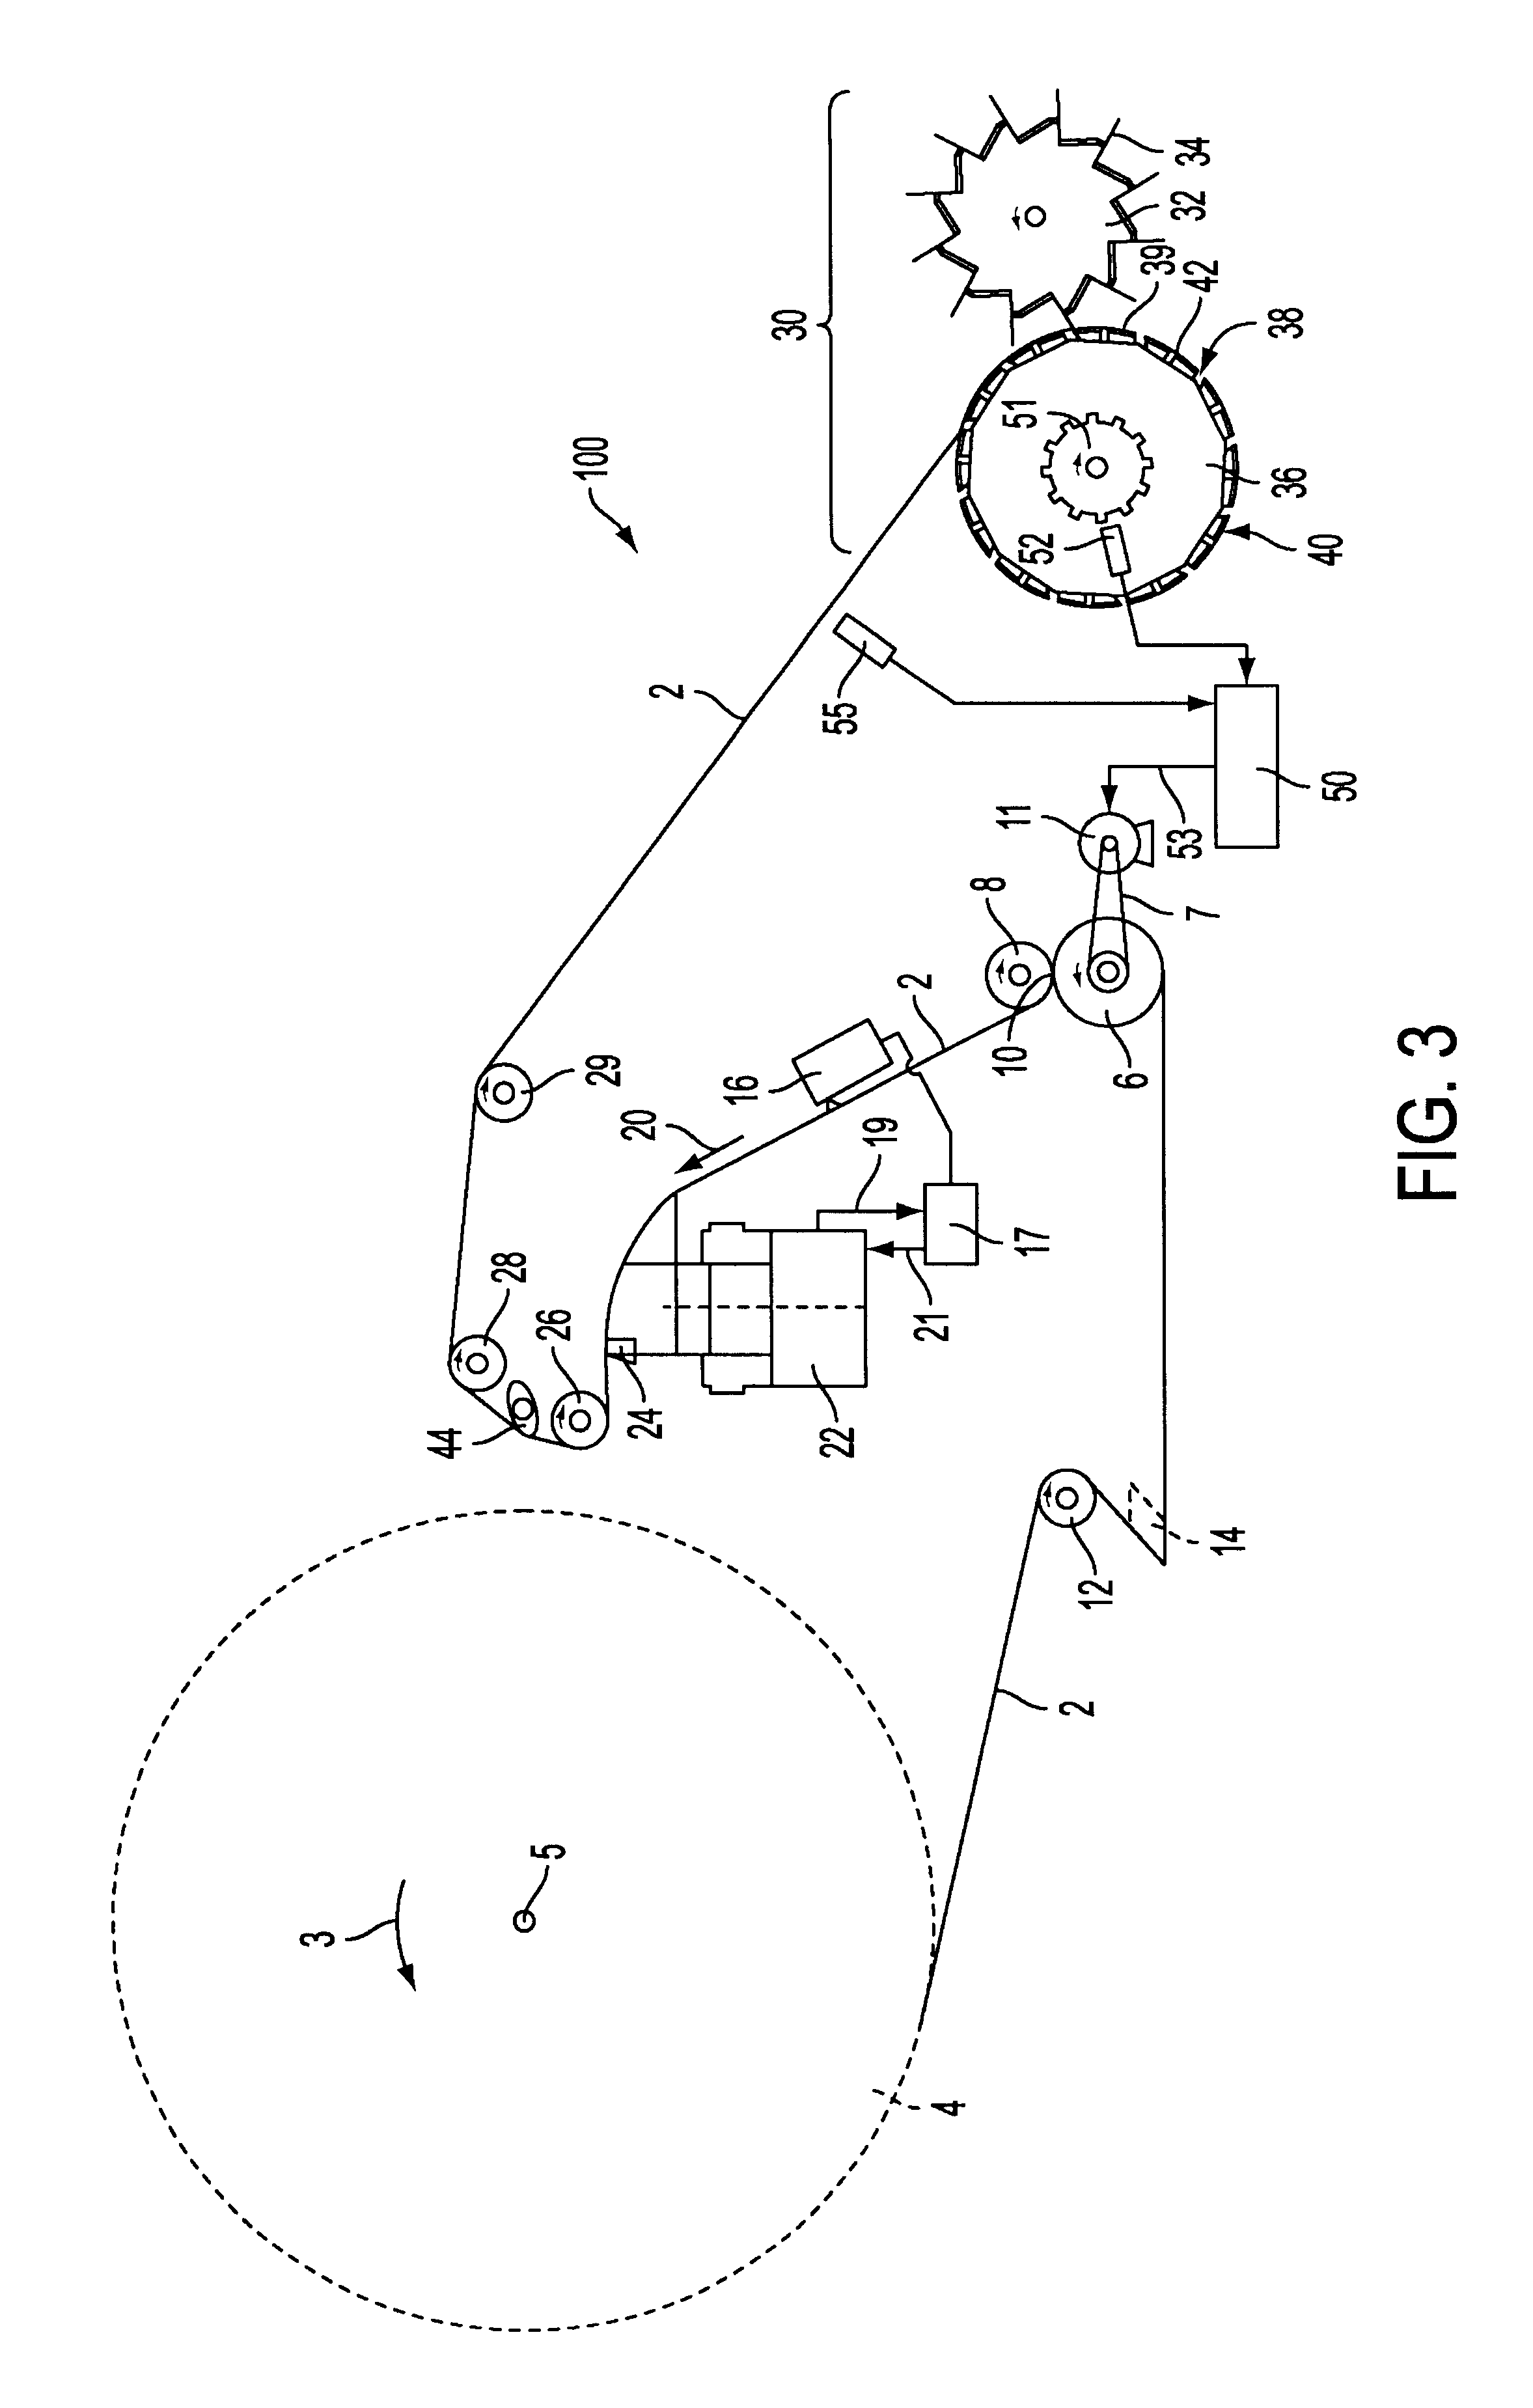 Apparatus for applying adhesive to a running web of wrapping material for smokers products